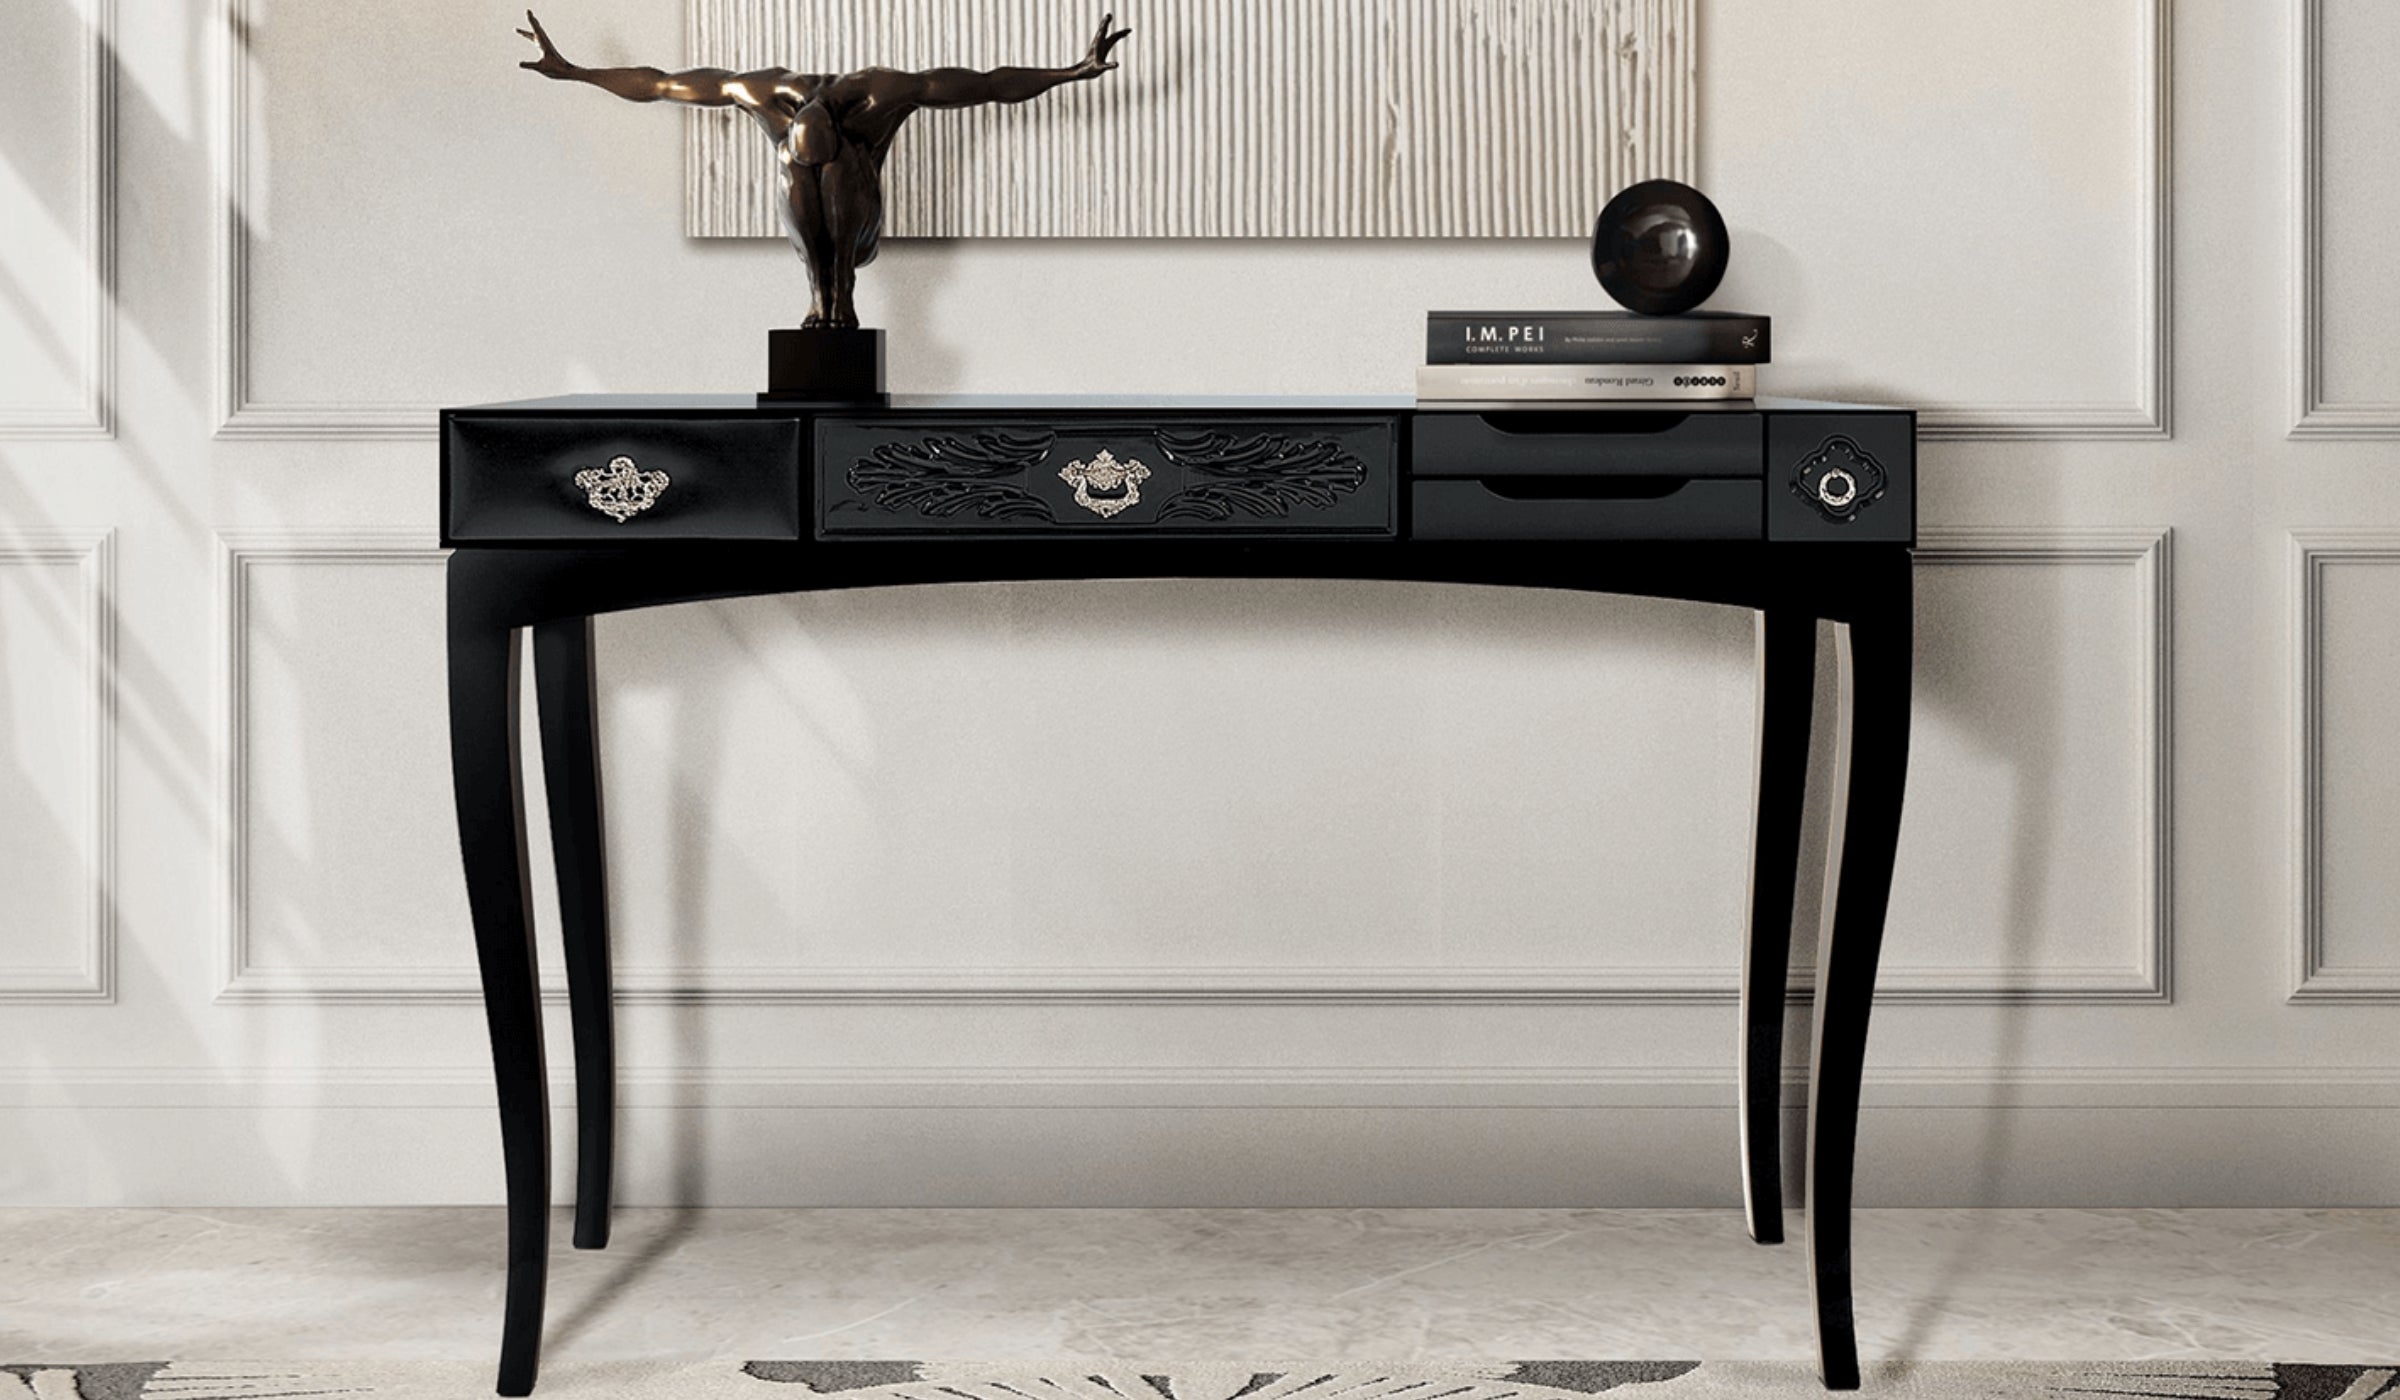 Soho - Elegant black rosewood console with brass and glass handles